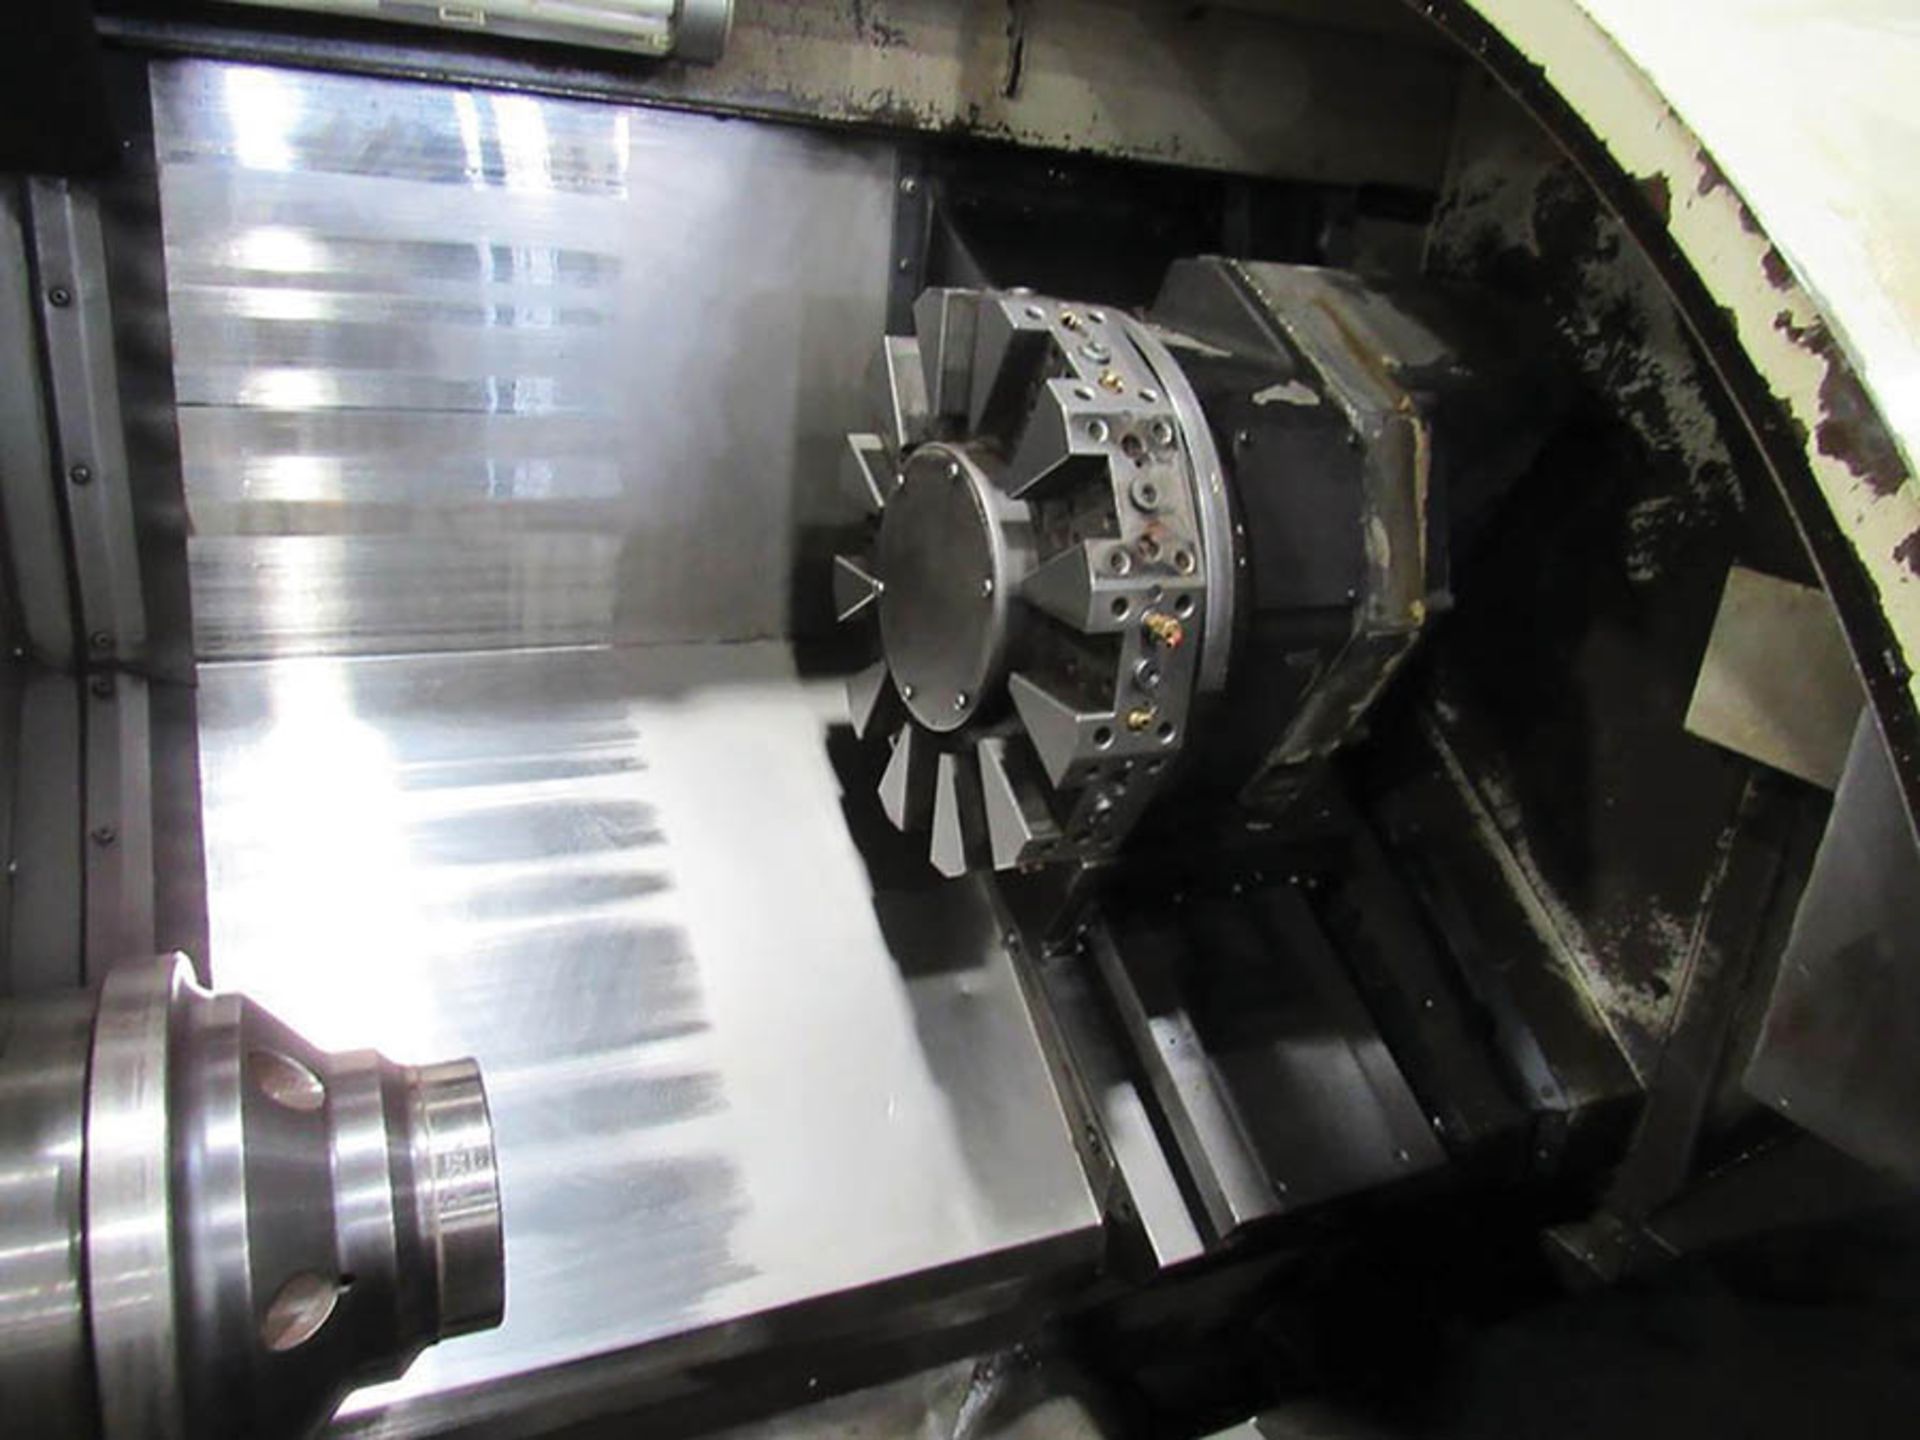 OKUMA CROWN CNC TURNING CENTER MODEL 762S-BB, S/N 0284, 12-POSITION TURRET, 3.15'' SPINDLE BORE, - Image 3 of 8